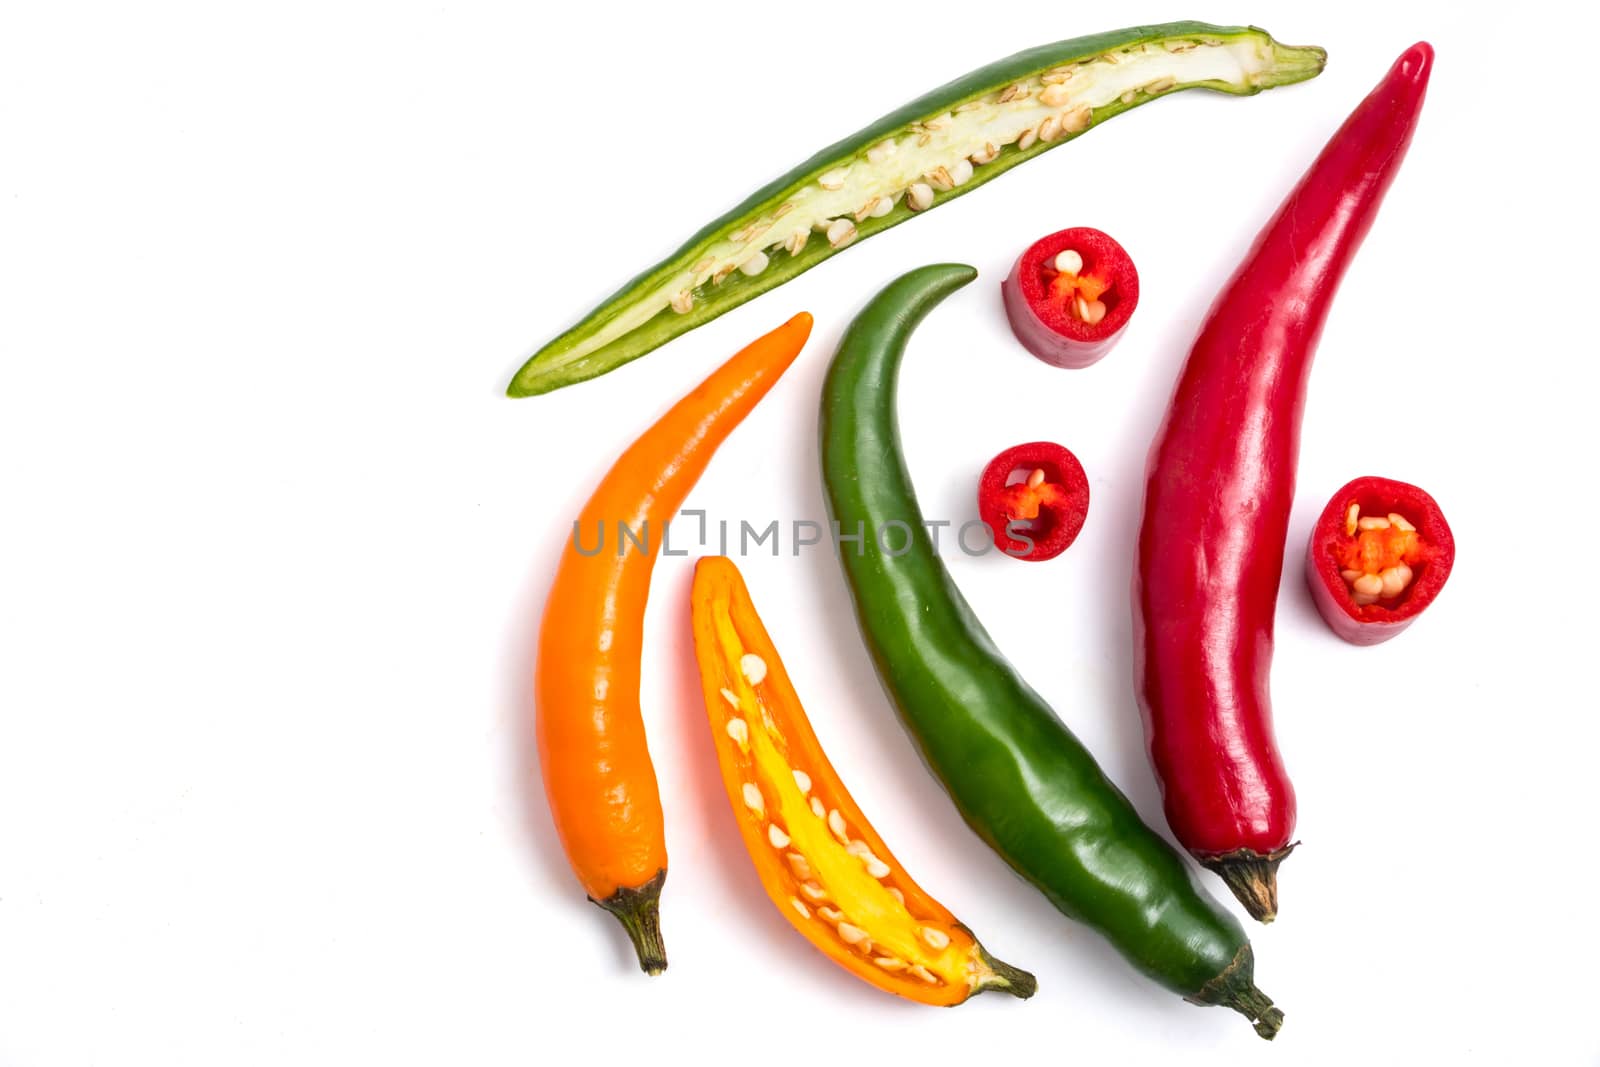 Colorful mix of chili pappers on white background. by ronnarong